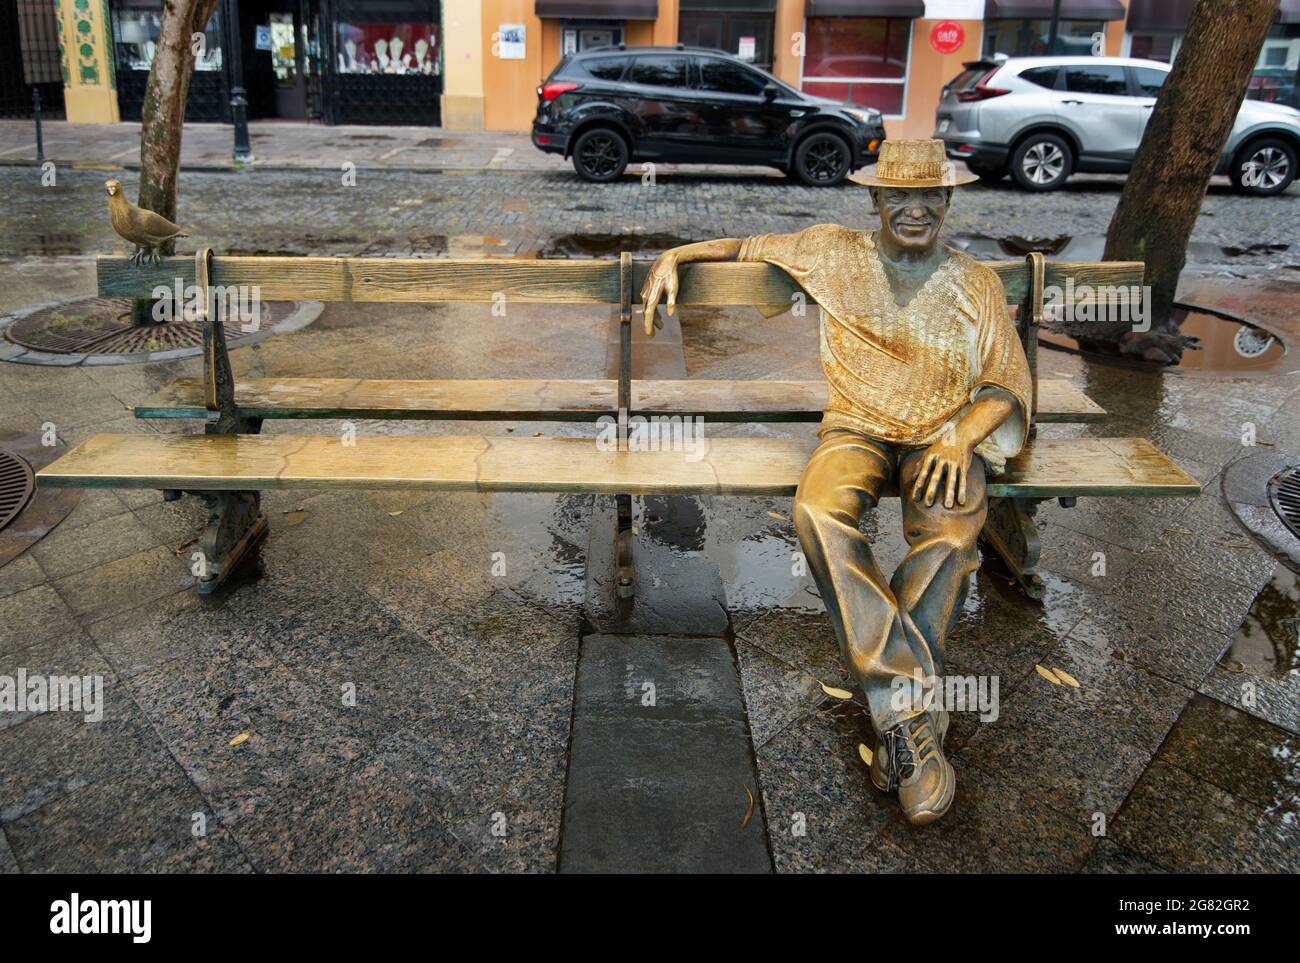 Statue of Puerto Rican composer Tite Curet Alonso sitting on a bench in the Plaza de Armas, Old San Juan, Puerto Rico, USA. The statue by Luz Badillo. Stock Photo